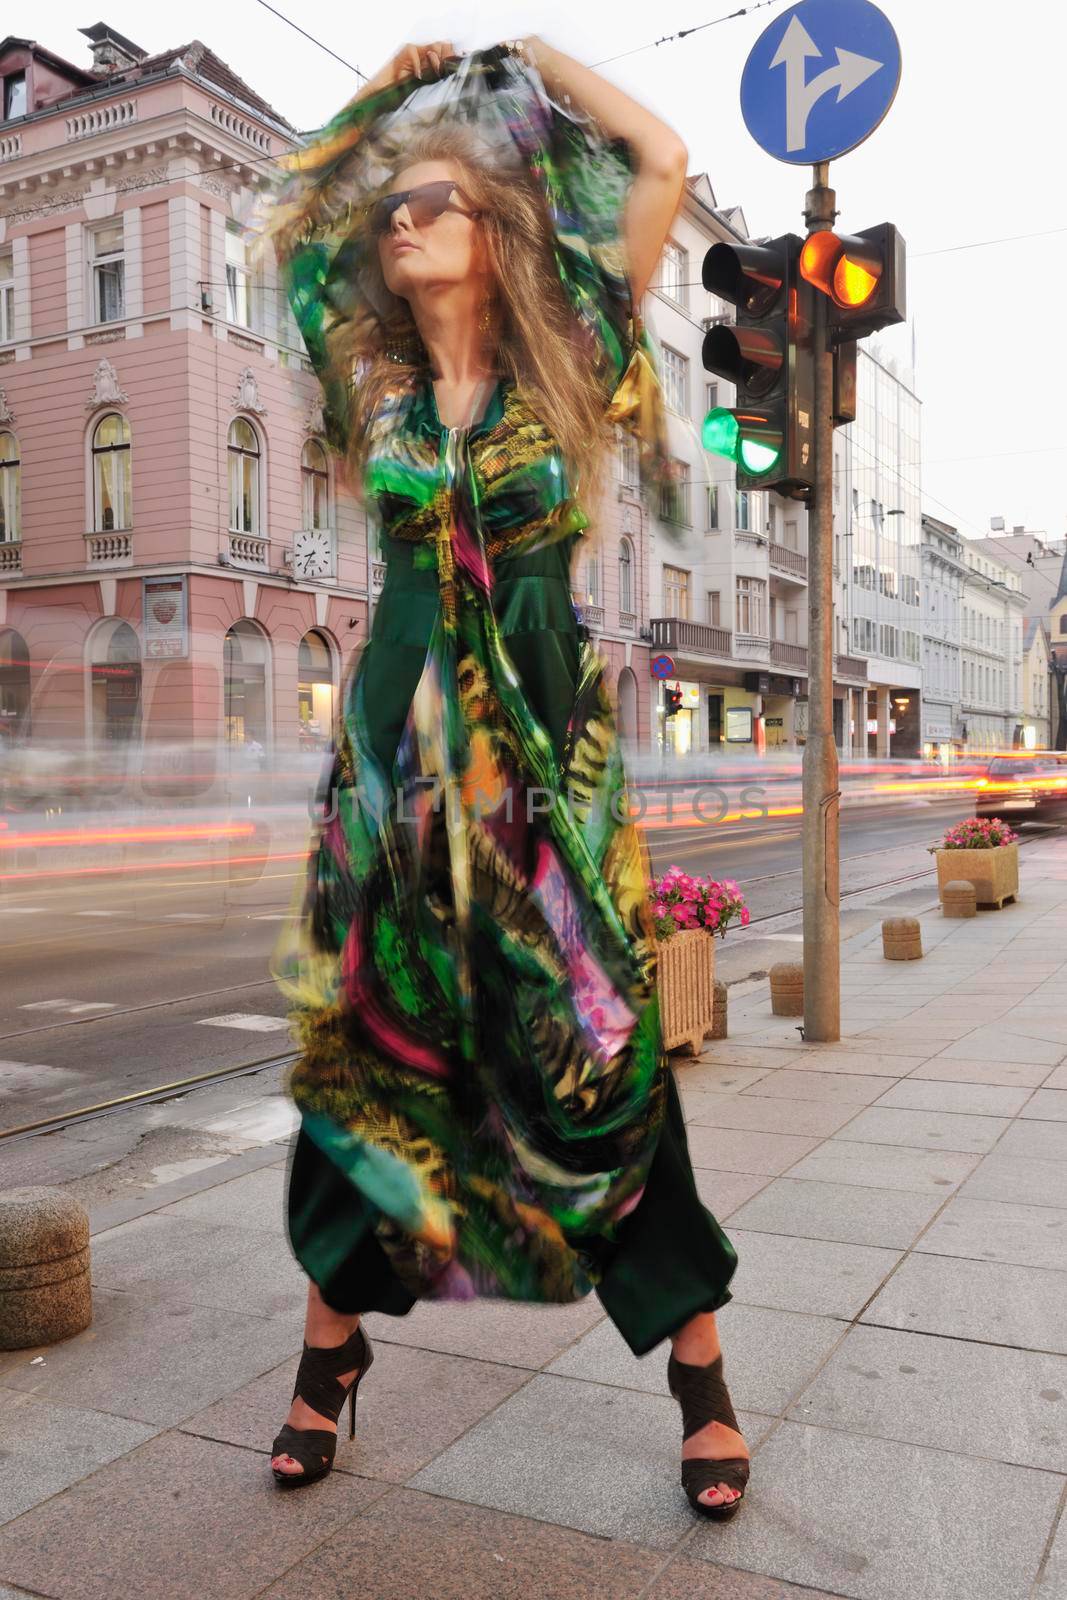 one beautiful young elegant woman in fashion and urban style dress in  city on  street at night alone